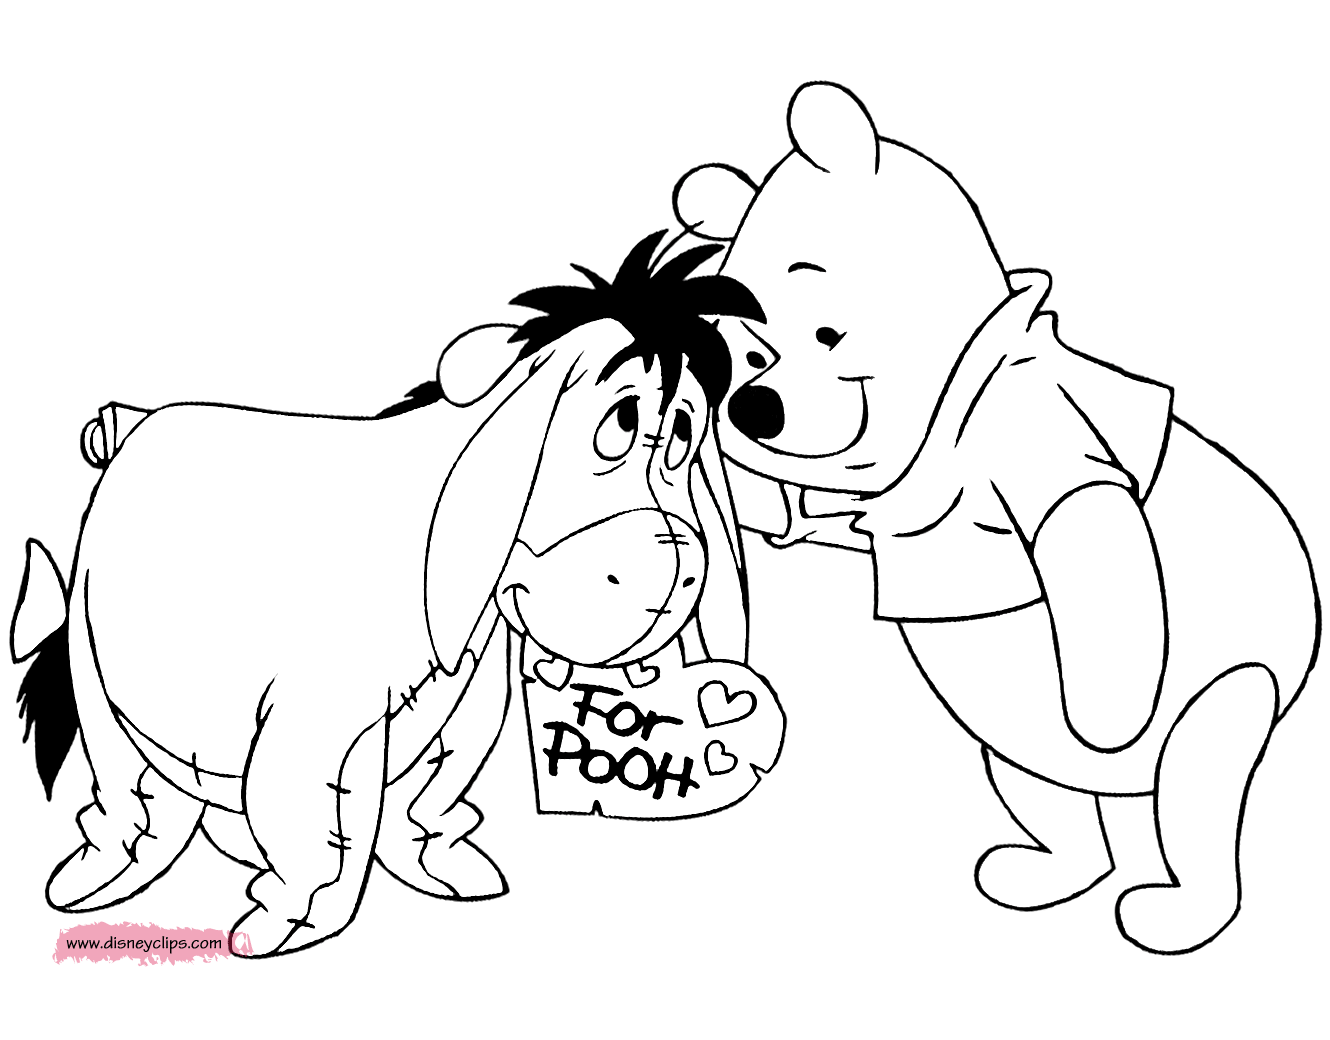 Disney valentines day coloring pages